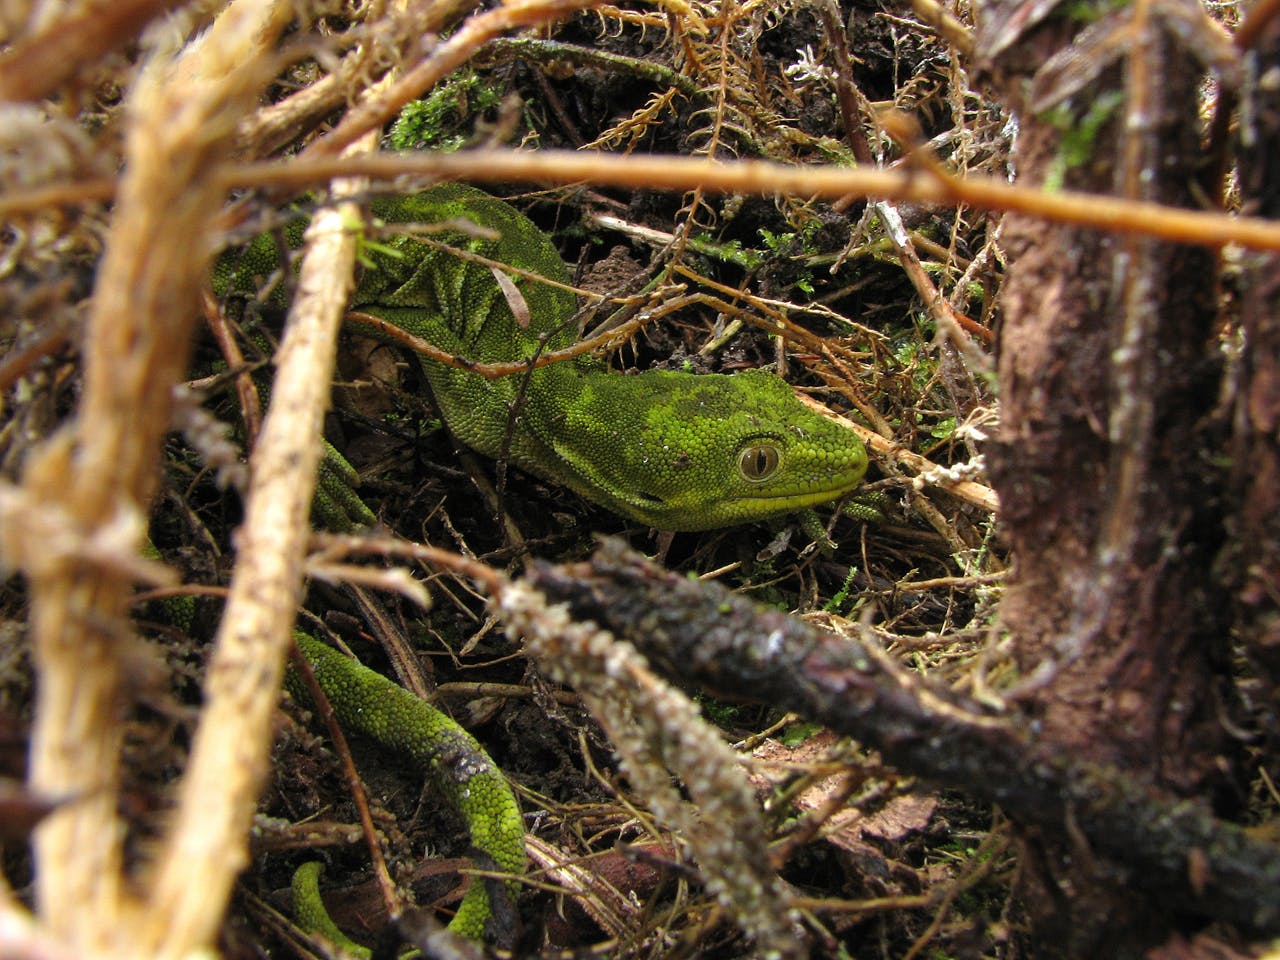 The Mt Mantell area is the meeting place of two green gecko species, the West Coast green gecko and the Nelson green gecko. Photo: Steuart Laing